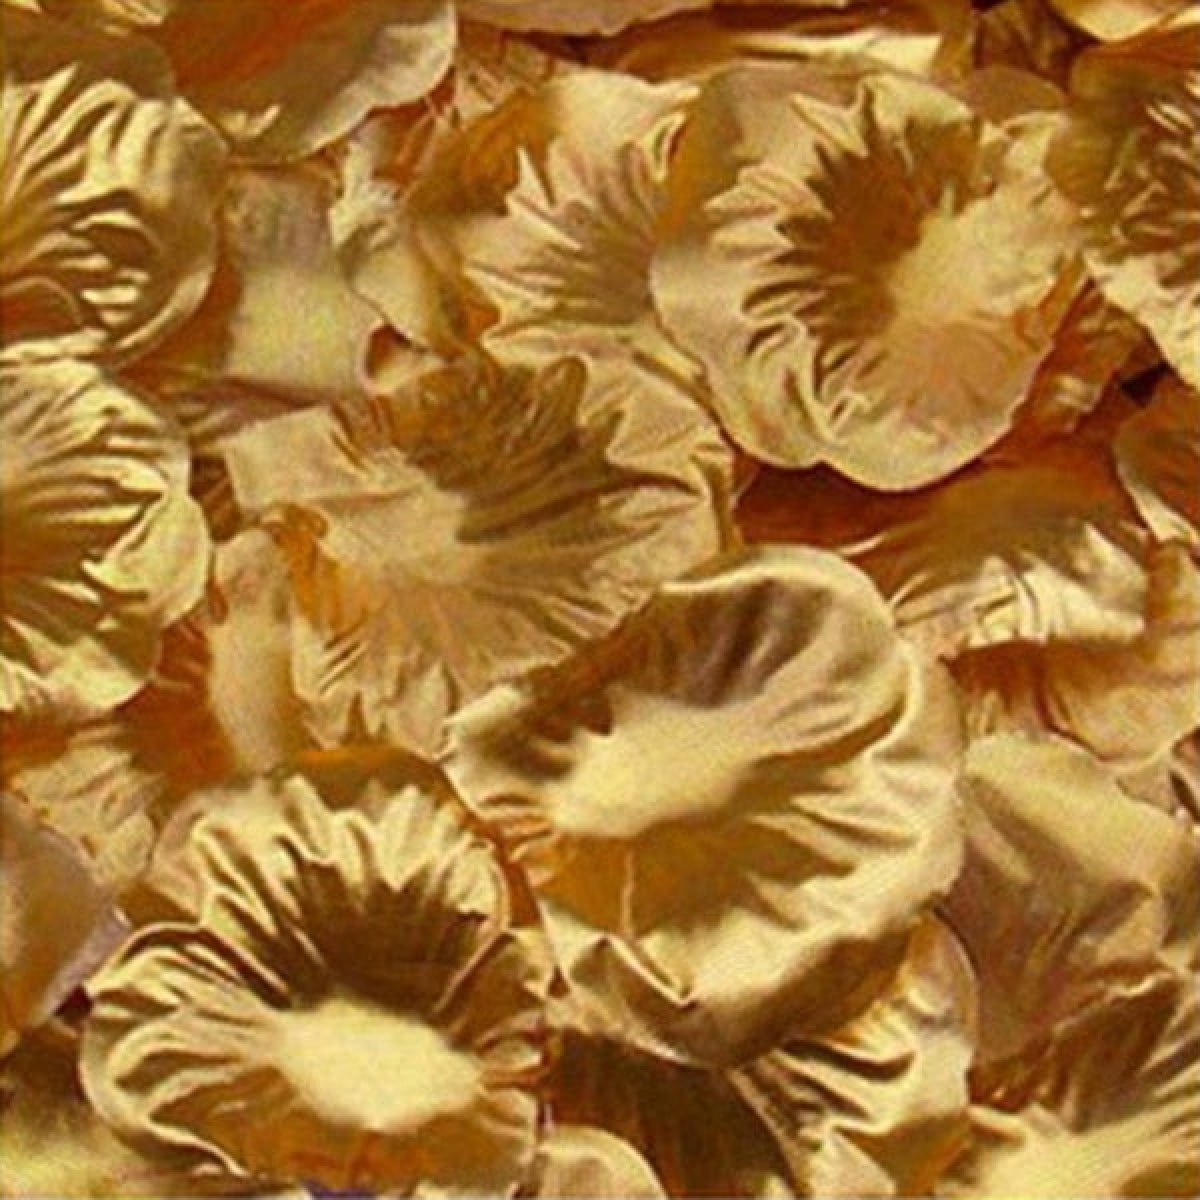 500pcs Rose Petals Flower Artificial Flowers Table Confetti Home Wedding Decorations - Gold - - Asia Sell